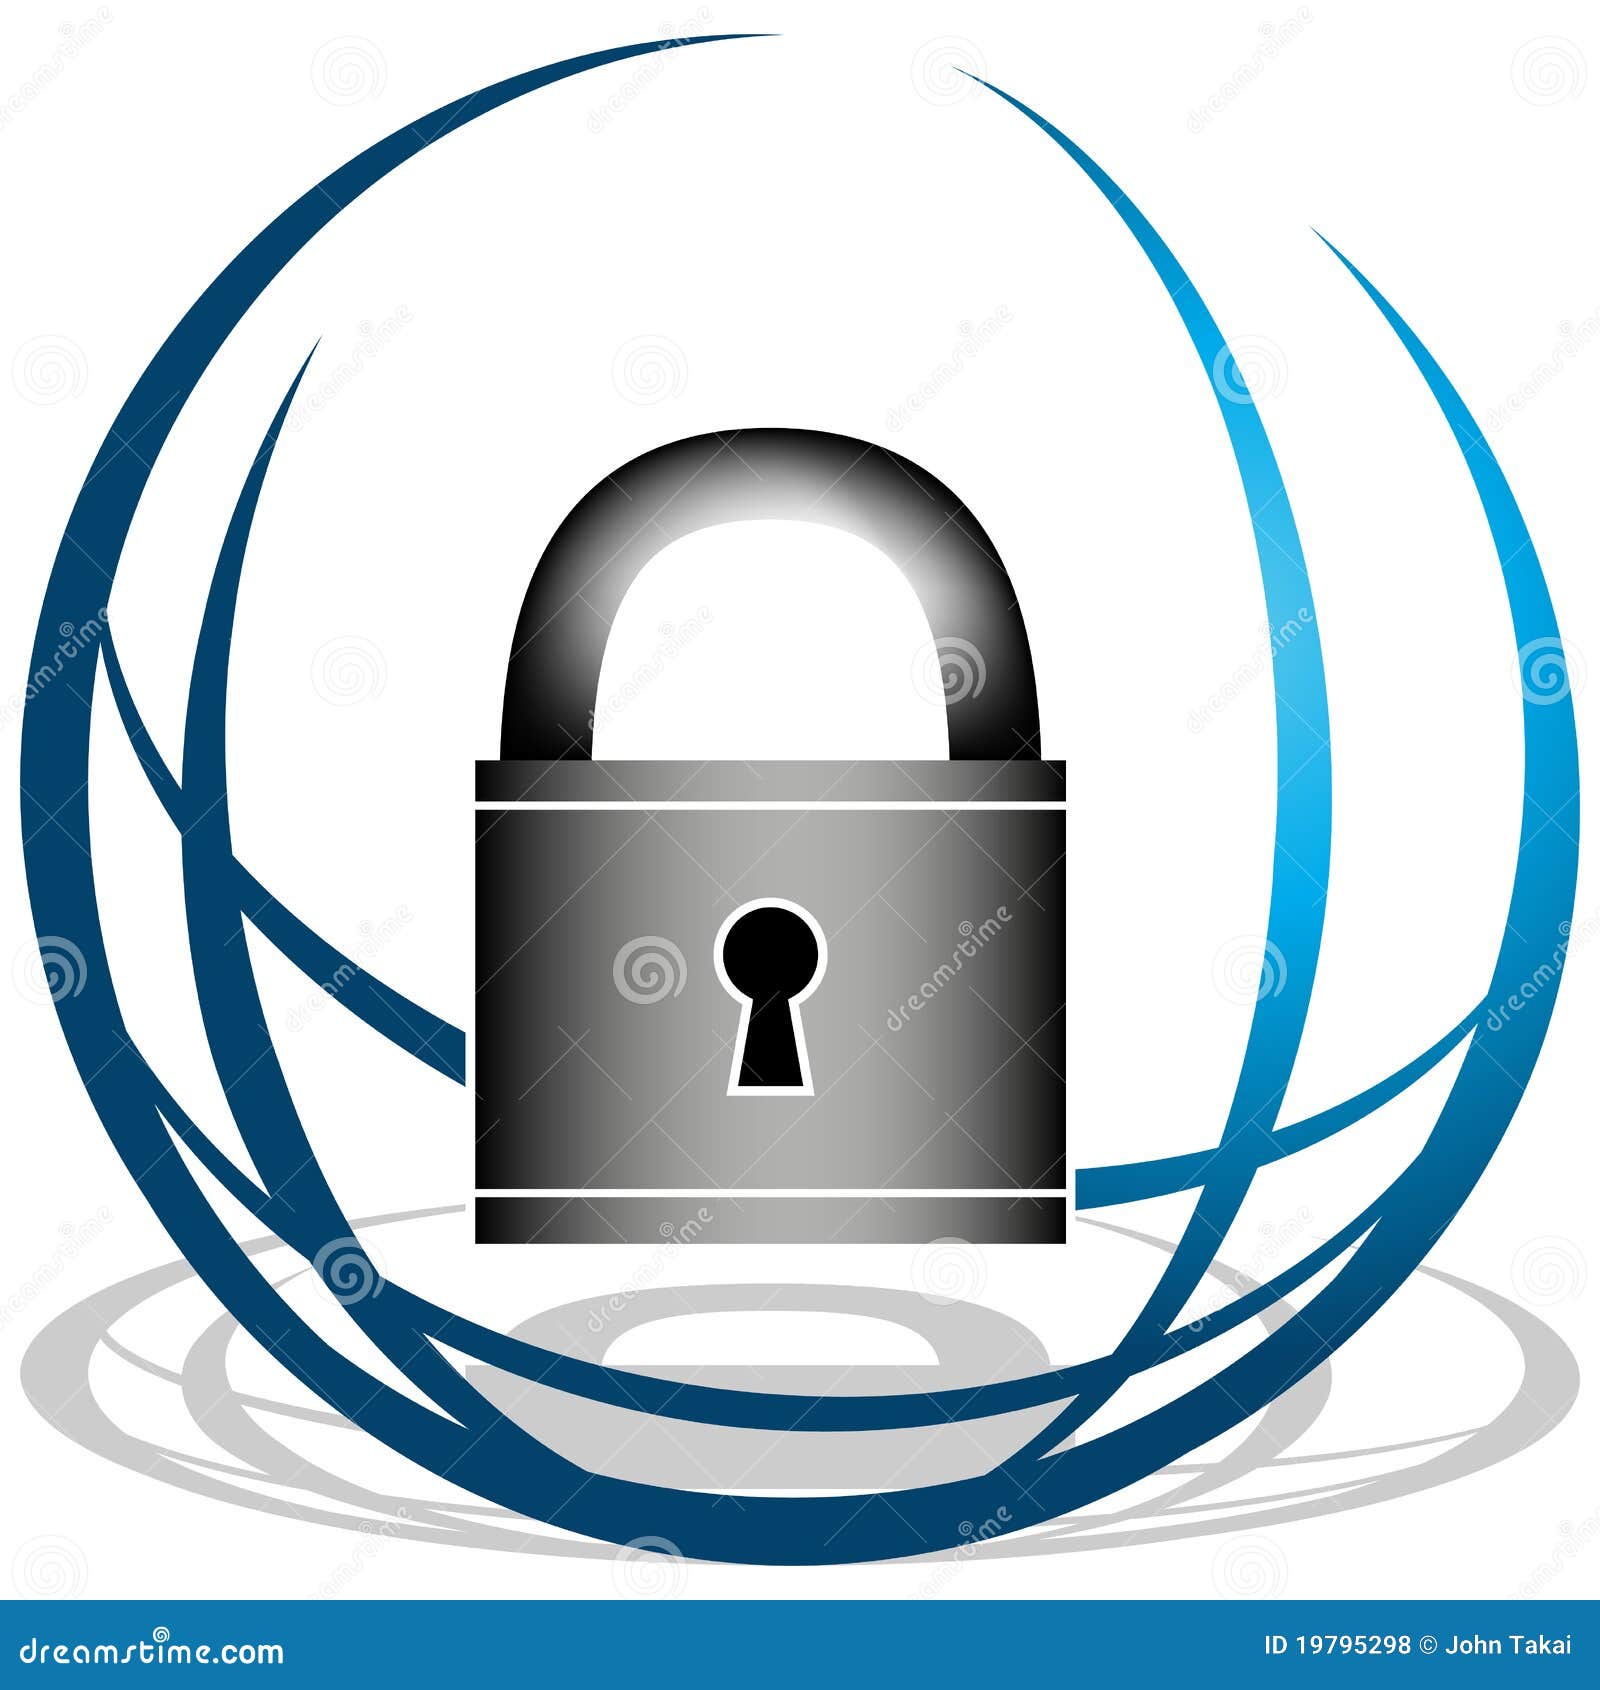 clipart information security - photo #35